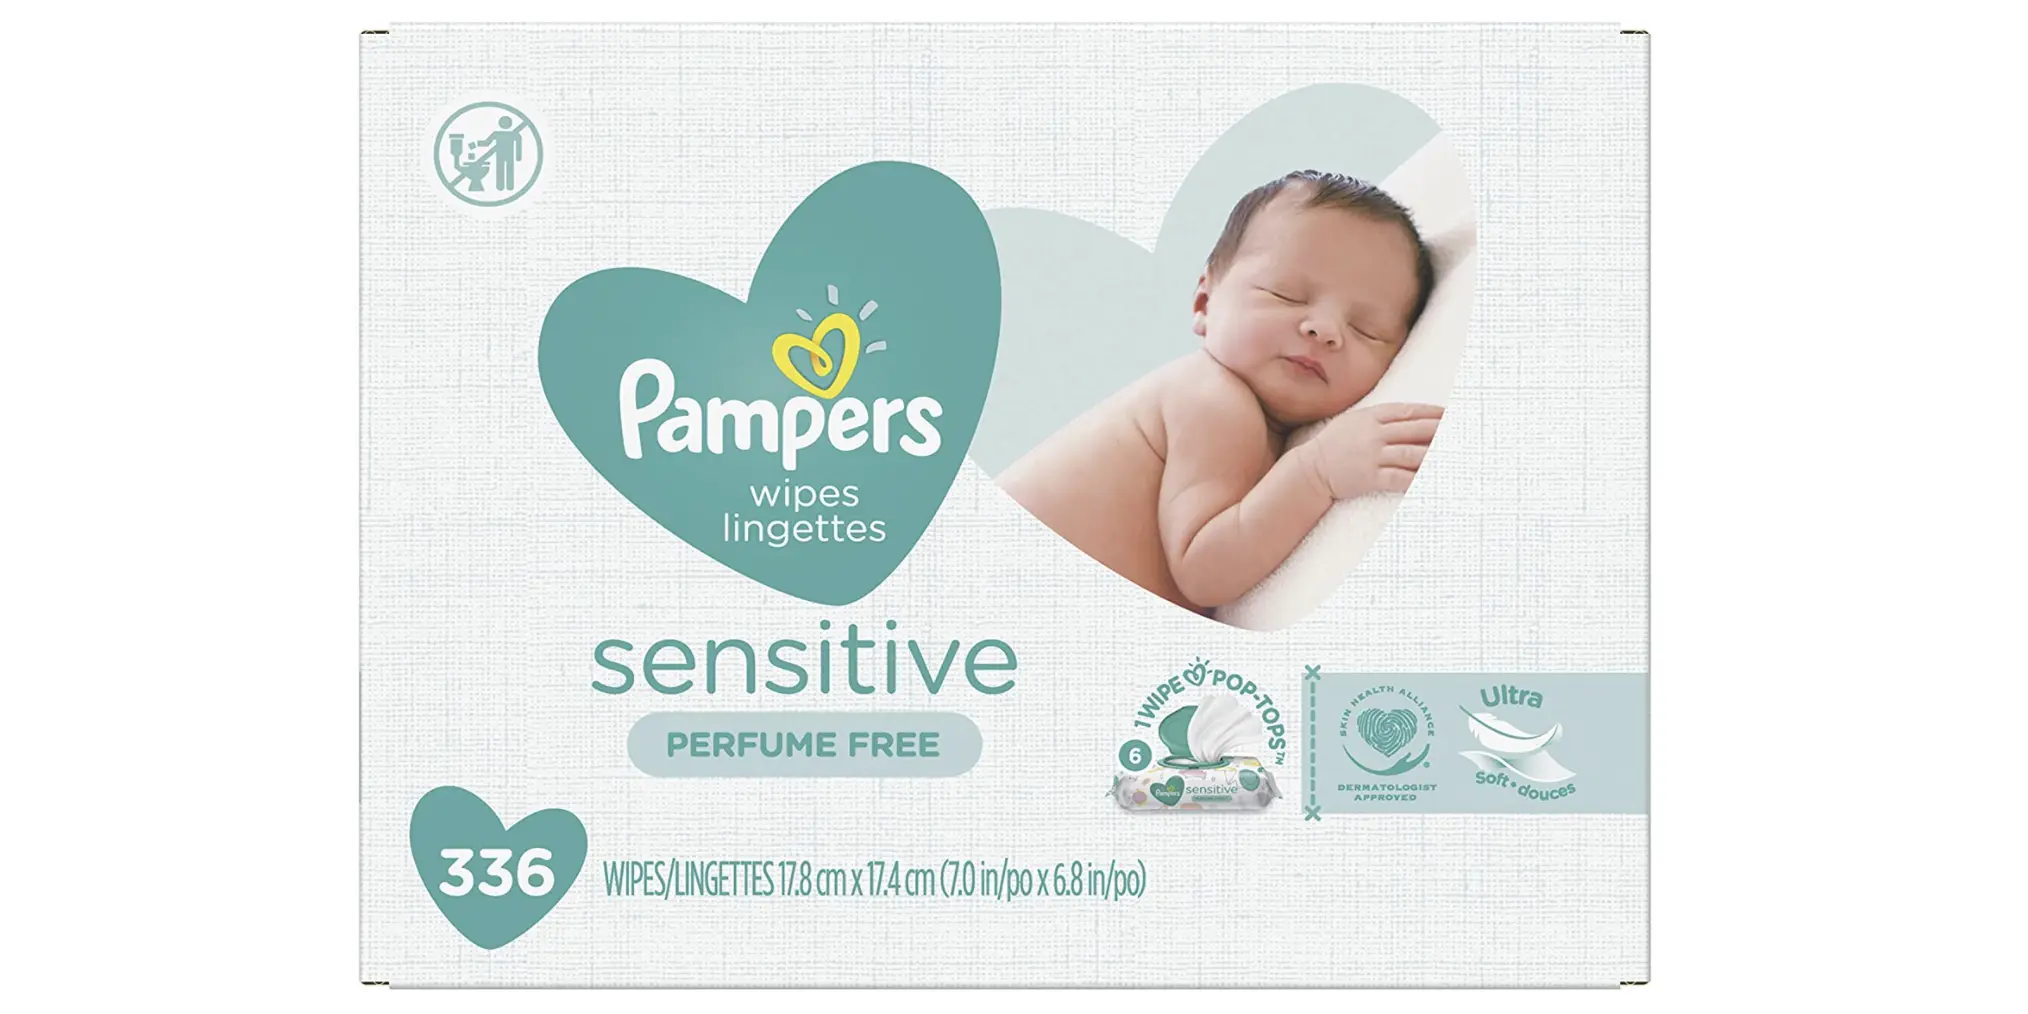 Amazon - Pampers Sensitive Wipes (6 Packs/336 Count)